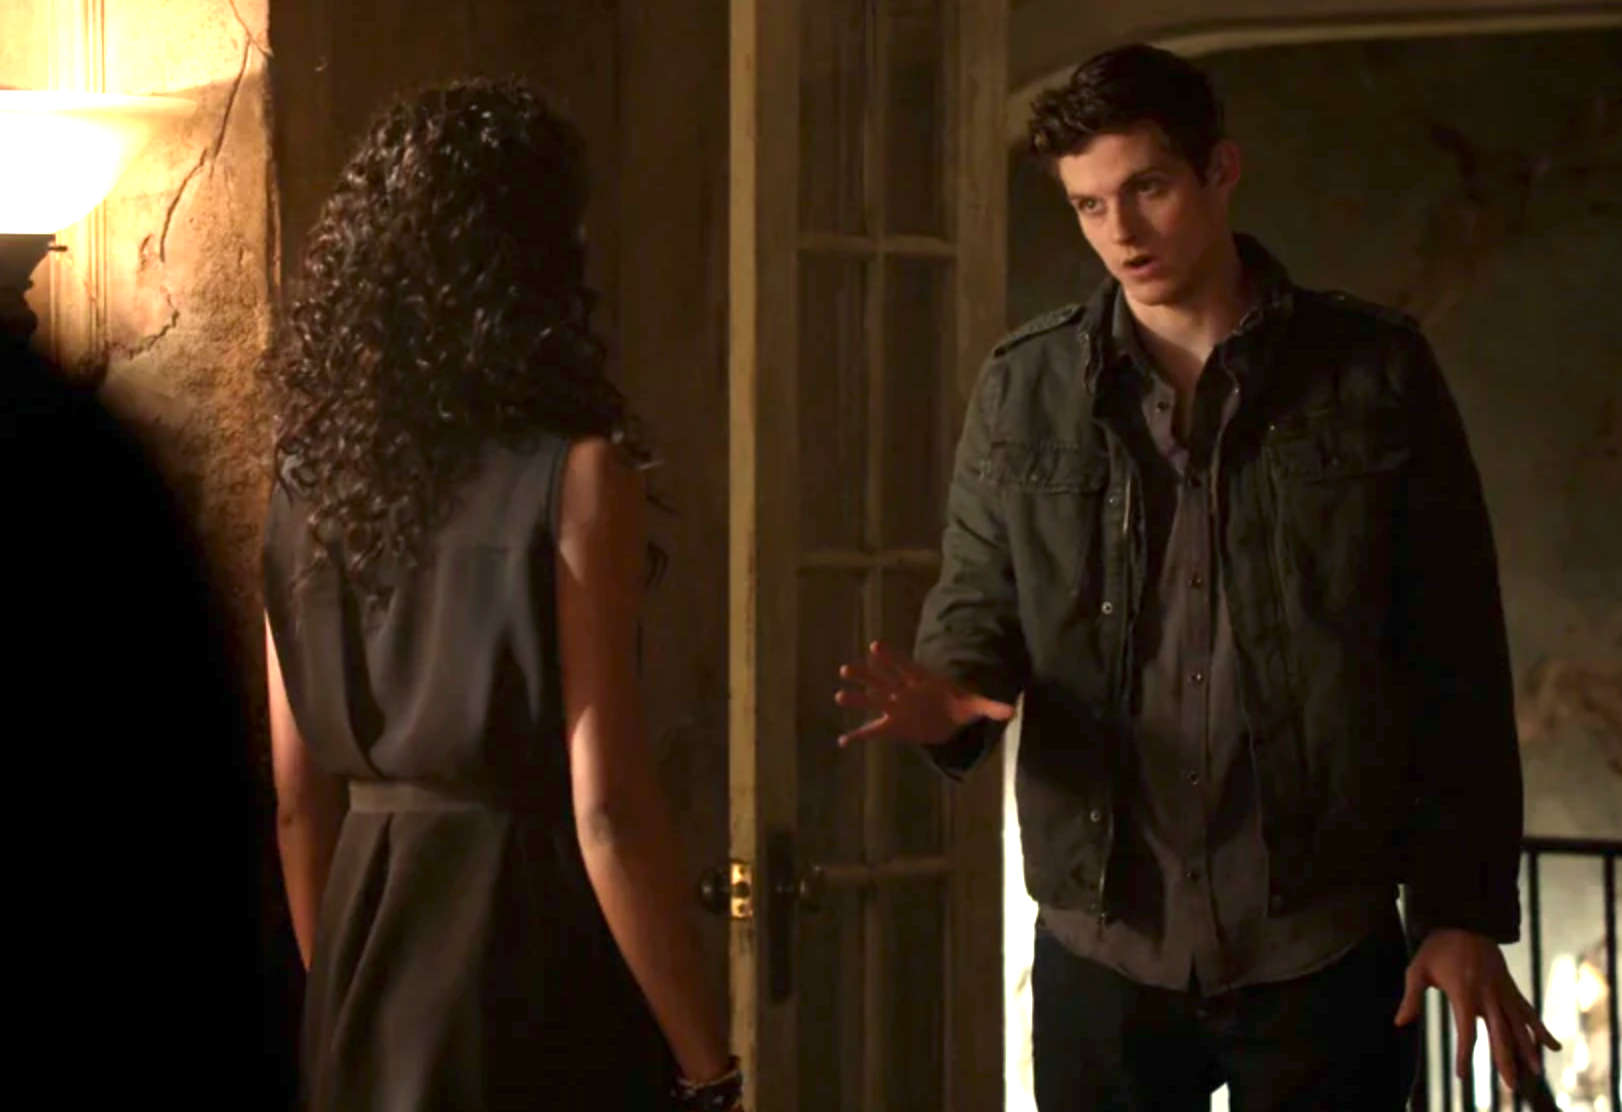 Kol and Rebekah in an intense scene in their witch bodies, Kol in a casual jacket gestures to Rebekah in a sleeveless dress, both indoors with dim lighting